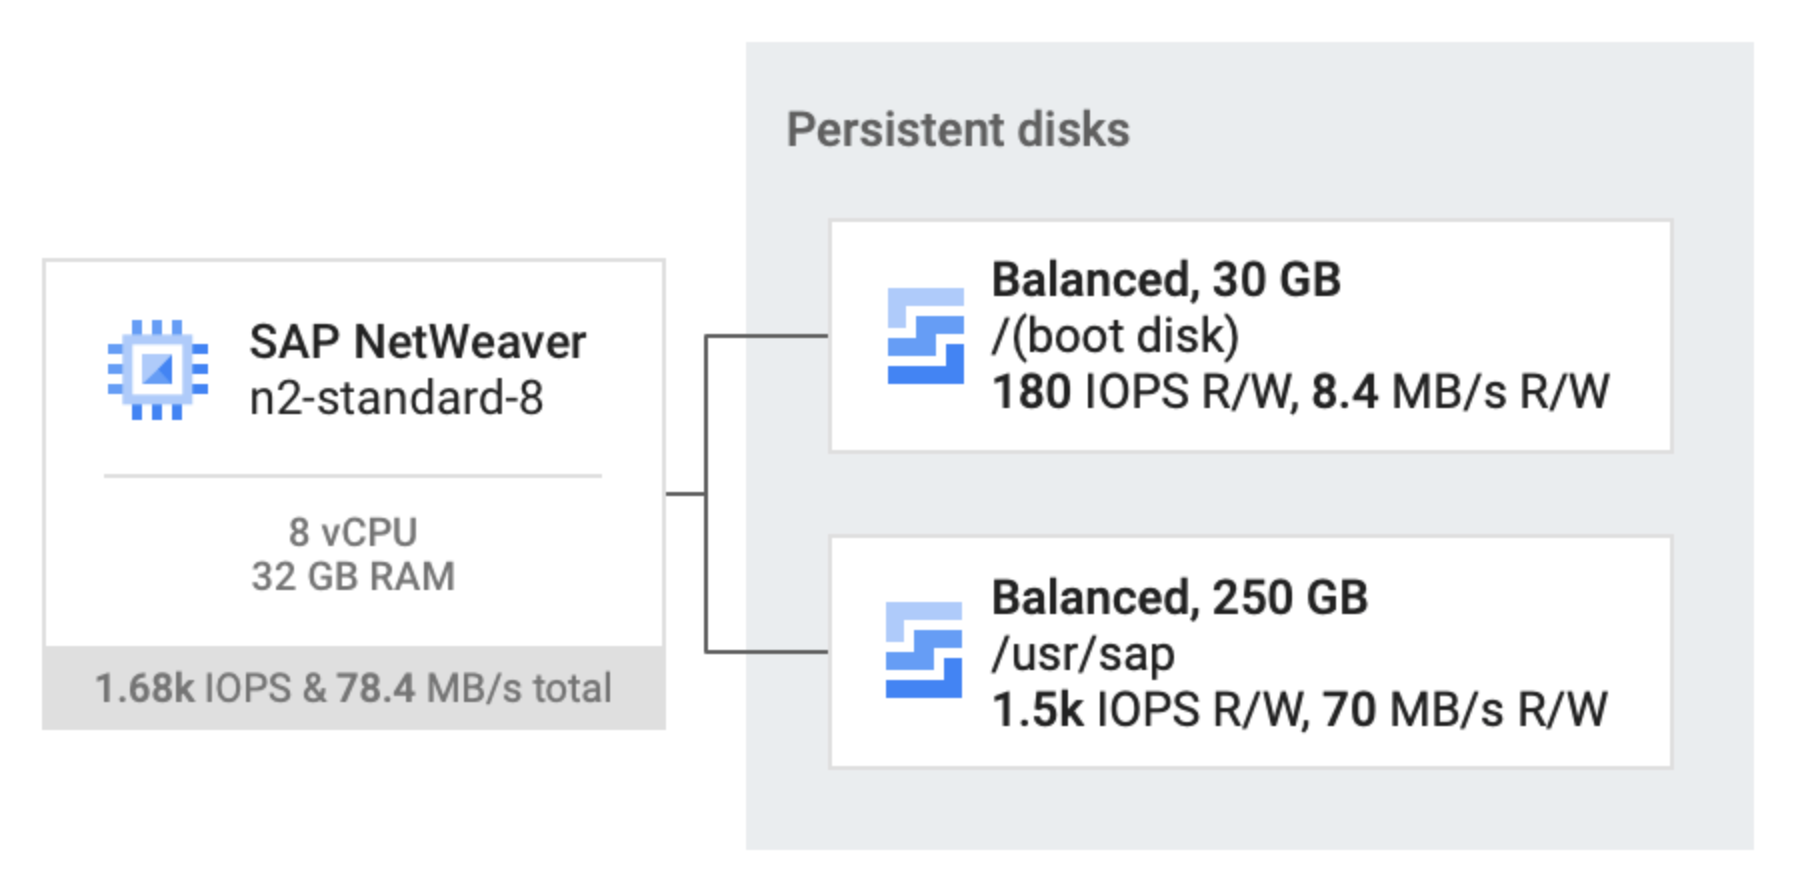 Two balanced persistent disks, one 80 GB and the other 250 GB, are attached
to an n2-standard-32 host VM that is running SAP NetWeaver